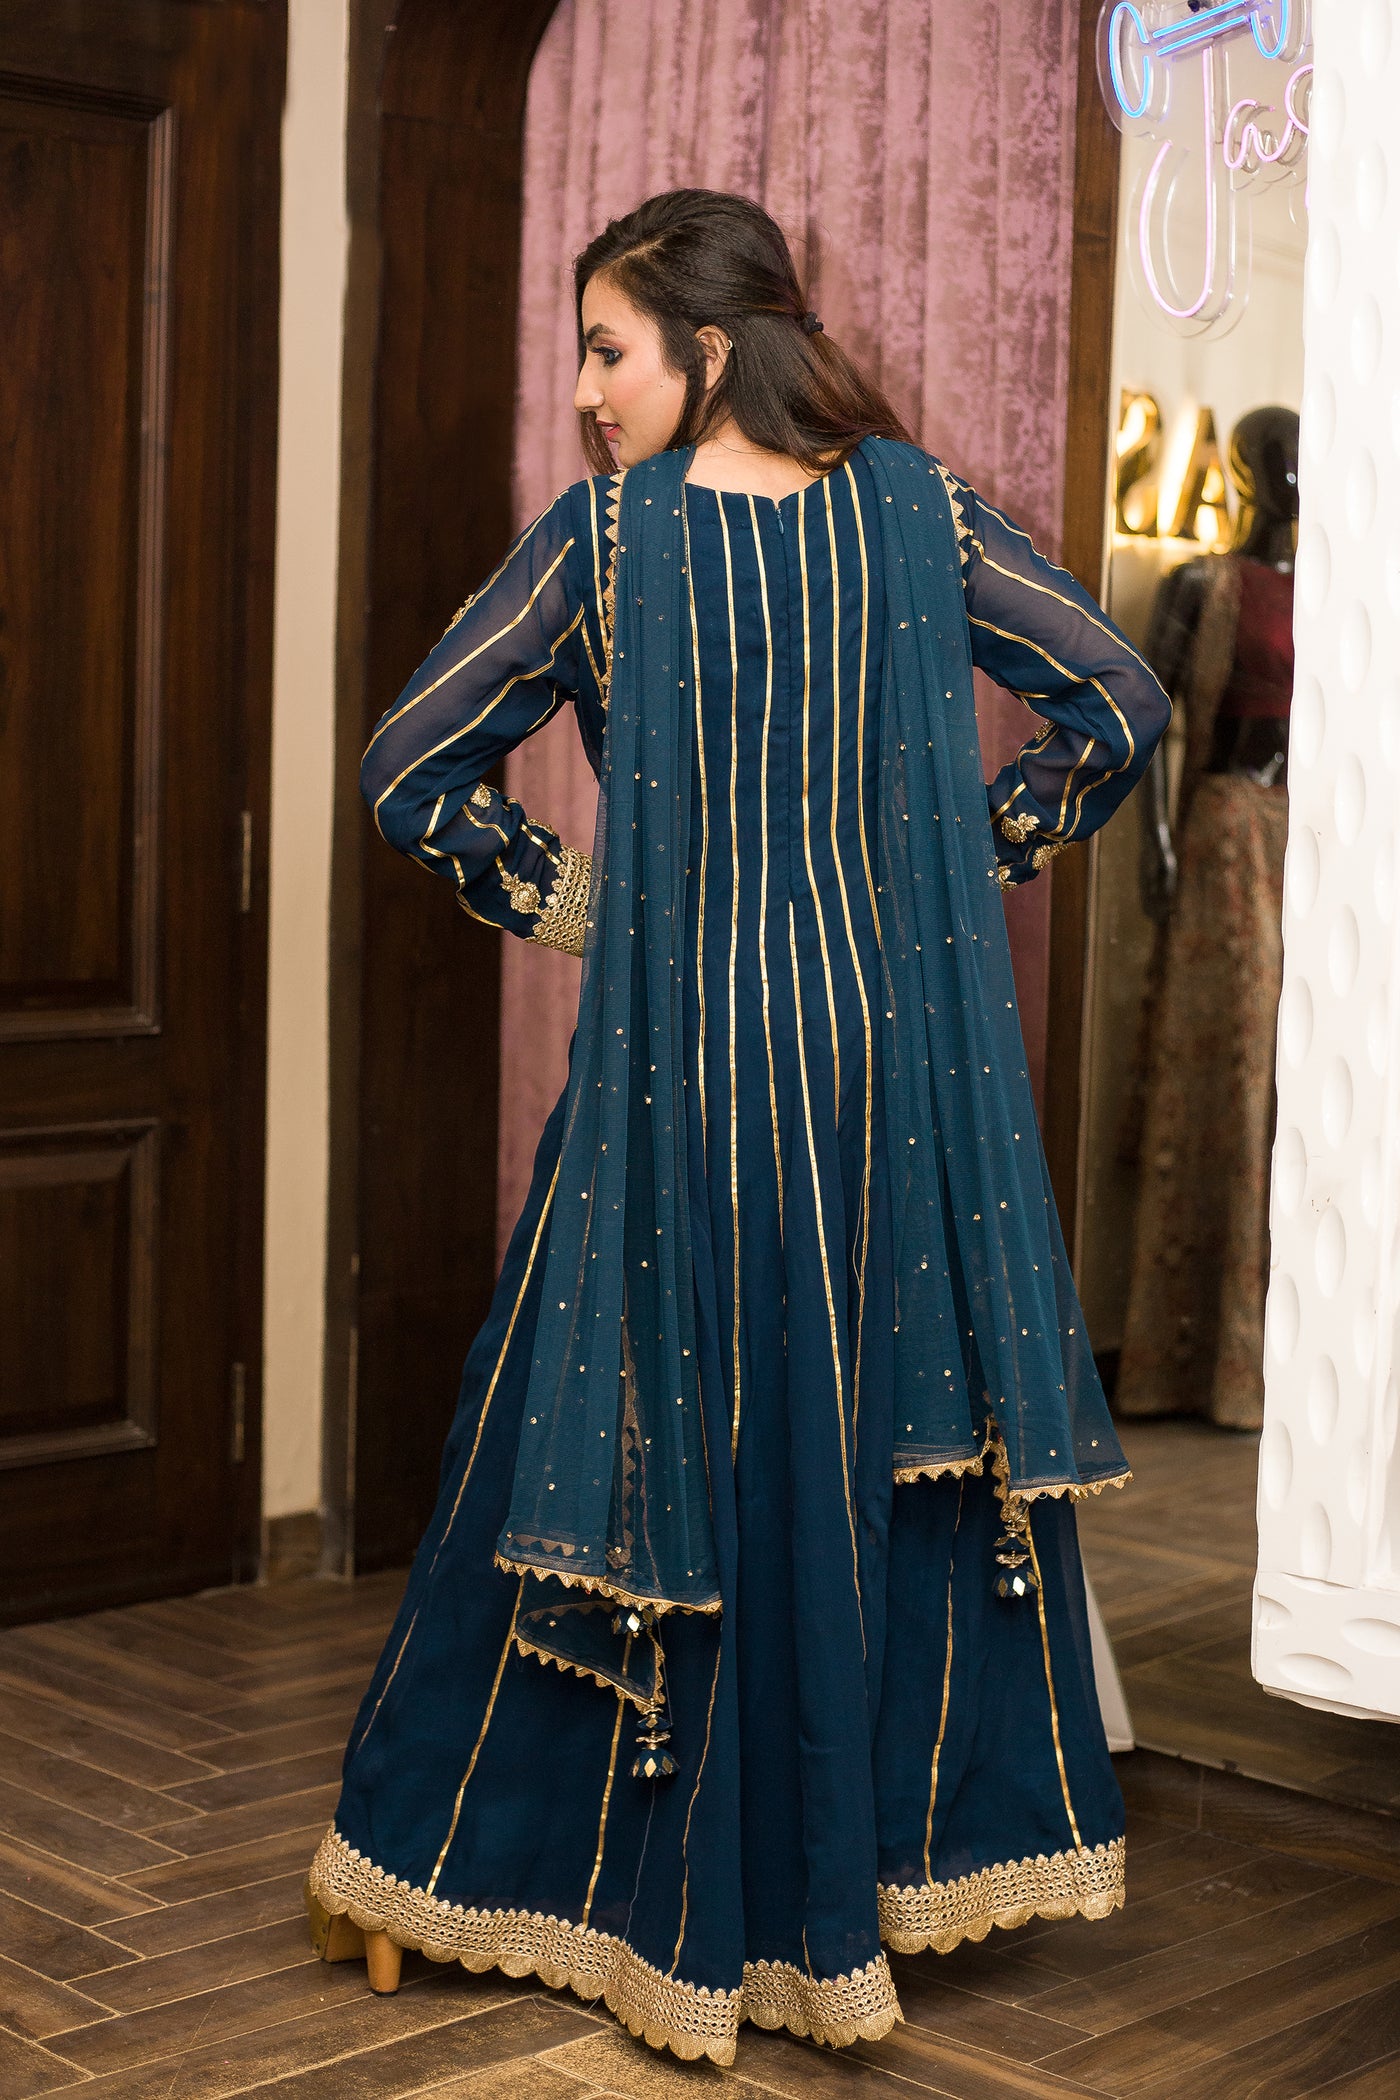 Dark Teal Embroidered Anarkali Indian Clothing in Denver, CO, Aurora, CO, Boulder, CO, Fort Collins, CO, Colorado Springs, CO, Parker, CO, Highlands Ranch, CO, Cherry Creek, CO, Centennial, CO, and Longmont, CO. NATIONWIDE SHIPPING USA- India Fashion X